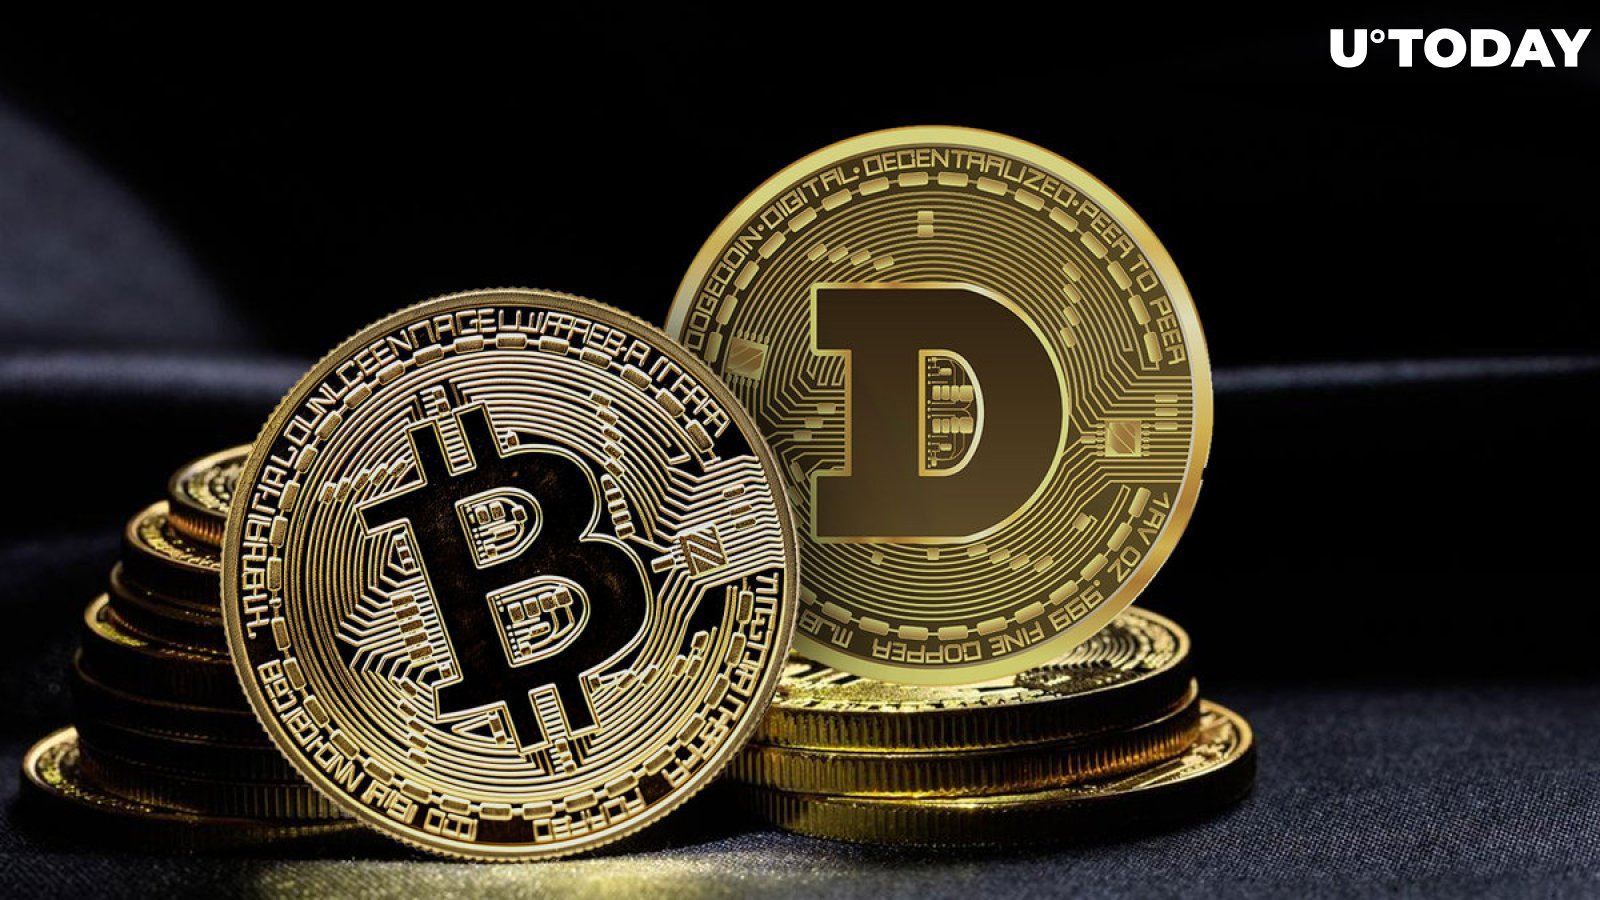 Dogecoin Founder Comments on Bitcoin (BTC) Topping $47,000